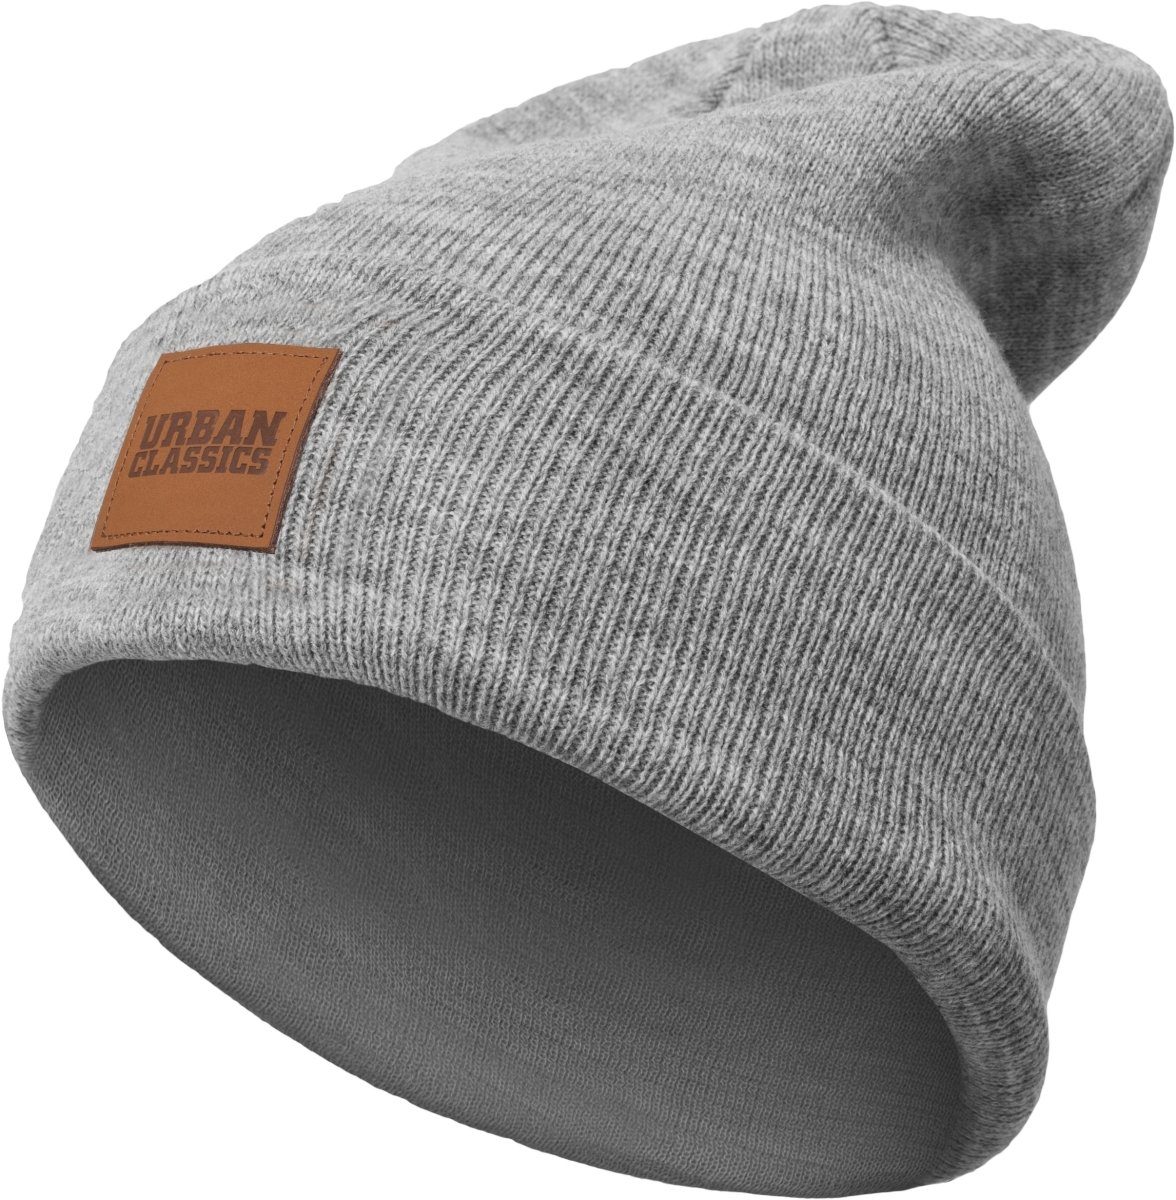 URBAN CLASSICS Beanie Unisex Synthetic Leatherpatch Long Beanie (1-St) grey